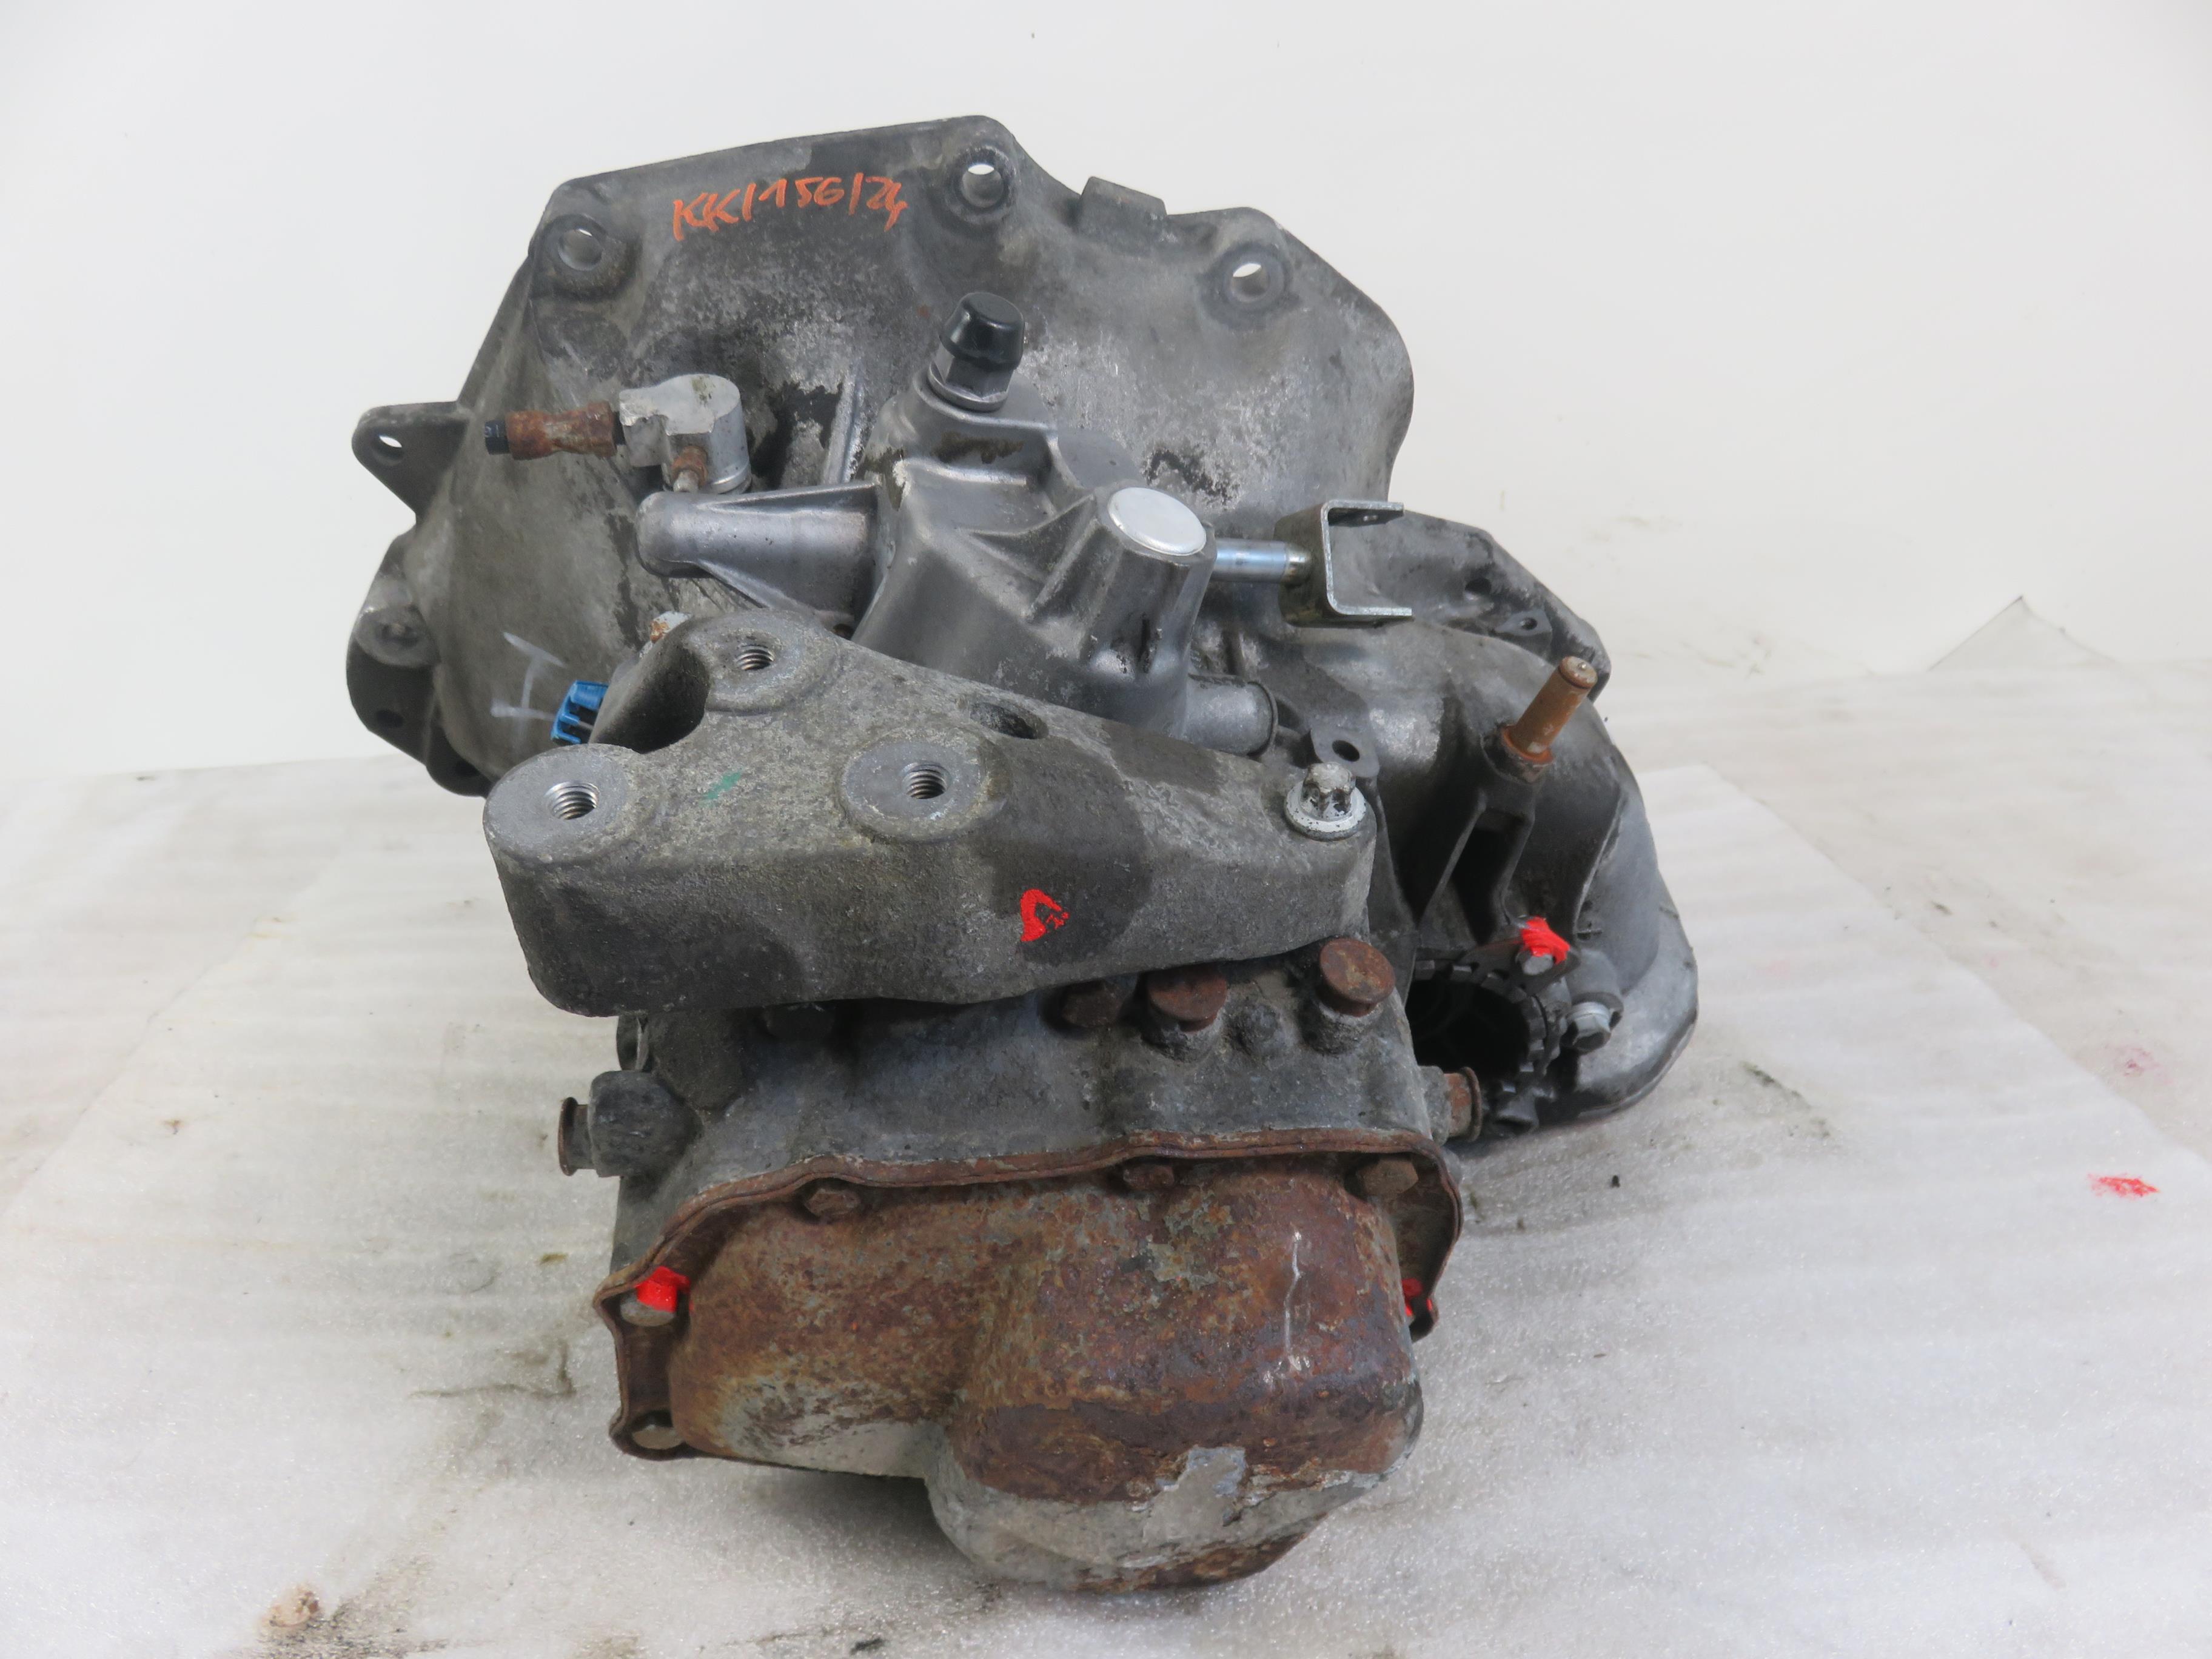 OPEL Astra G (1998-2009) Gearbox F17C374 24864788